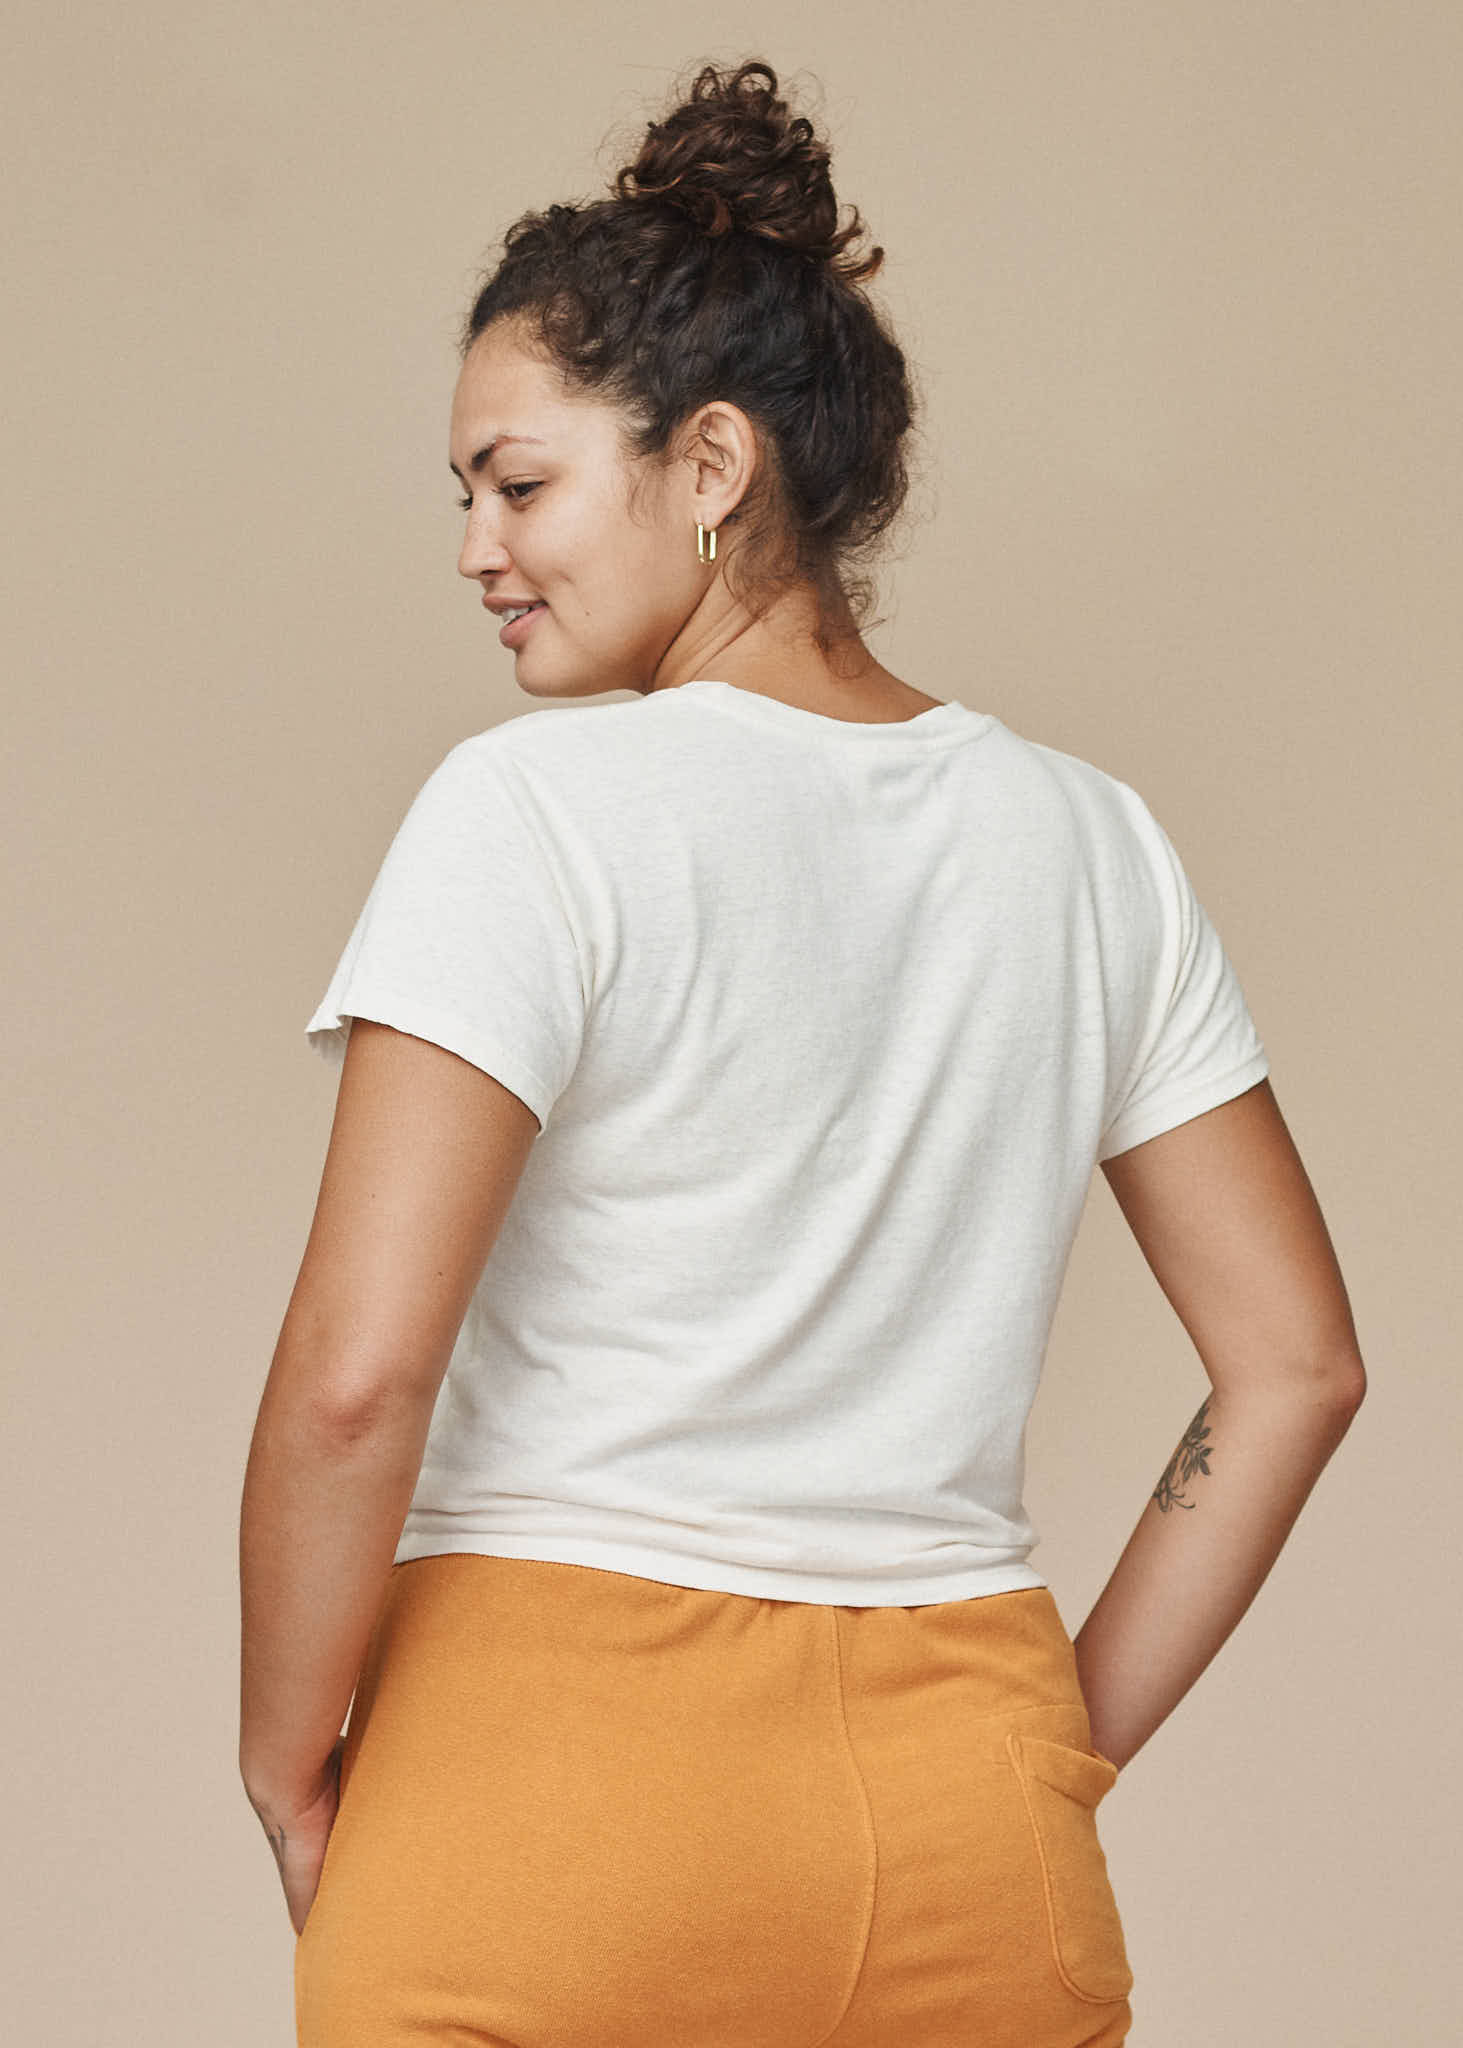 Cropped Lorel Tee | Jungmaven Hemp Clothing & Accessories / Color: